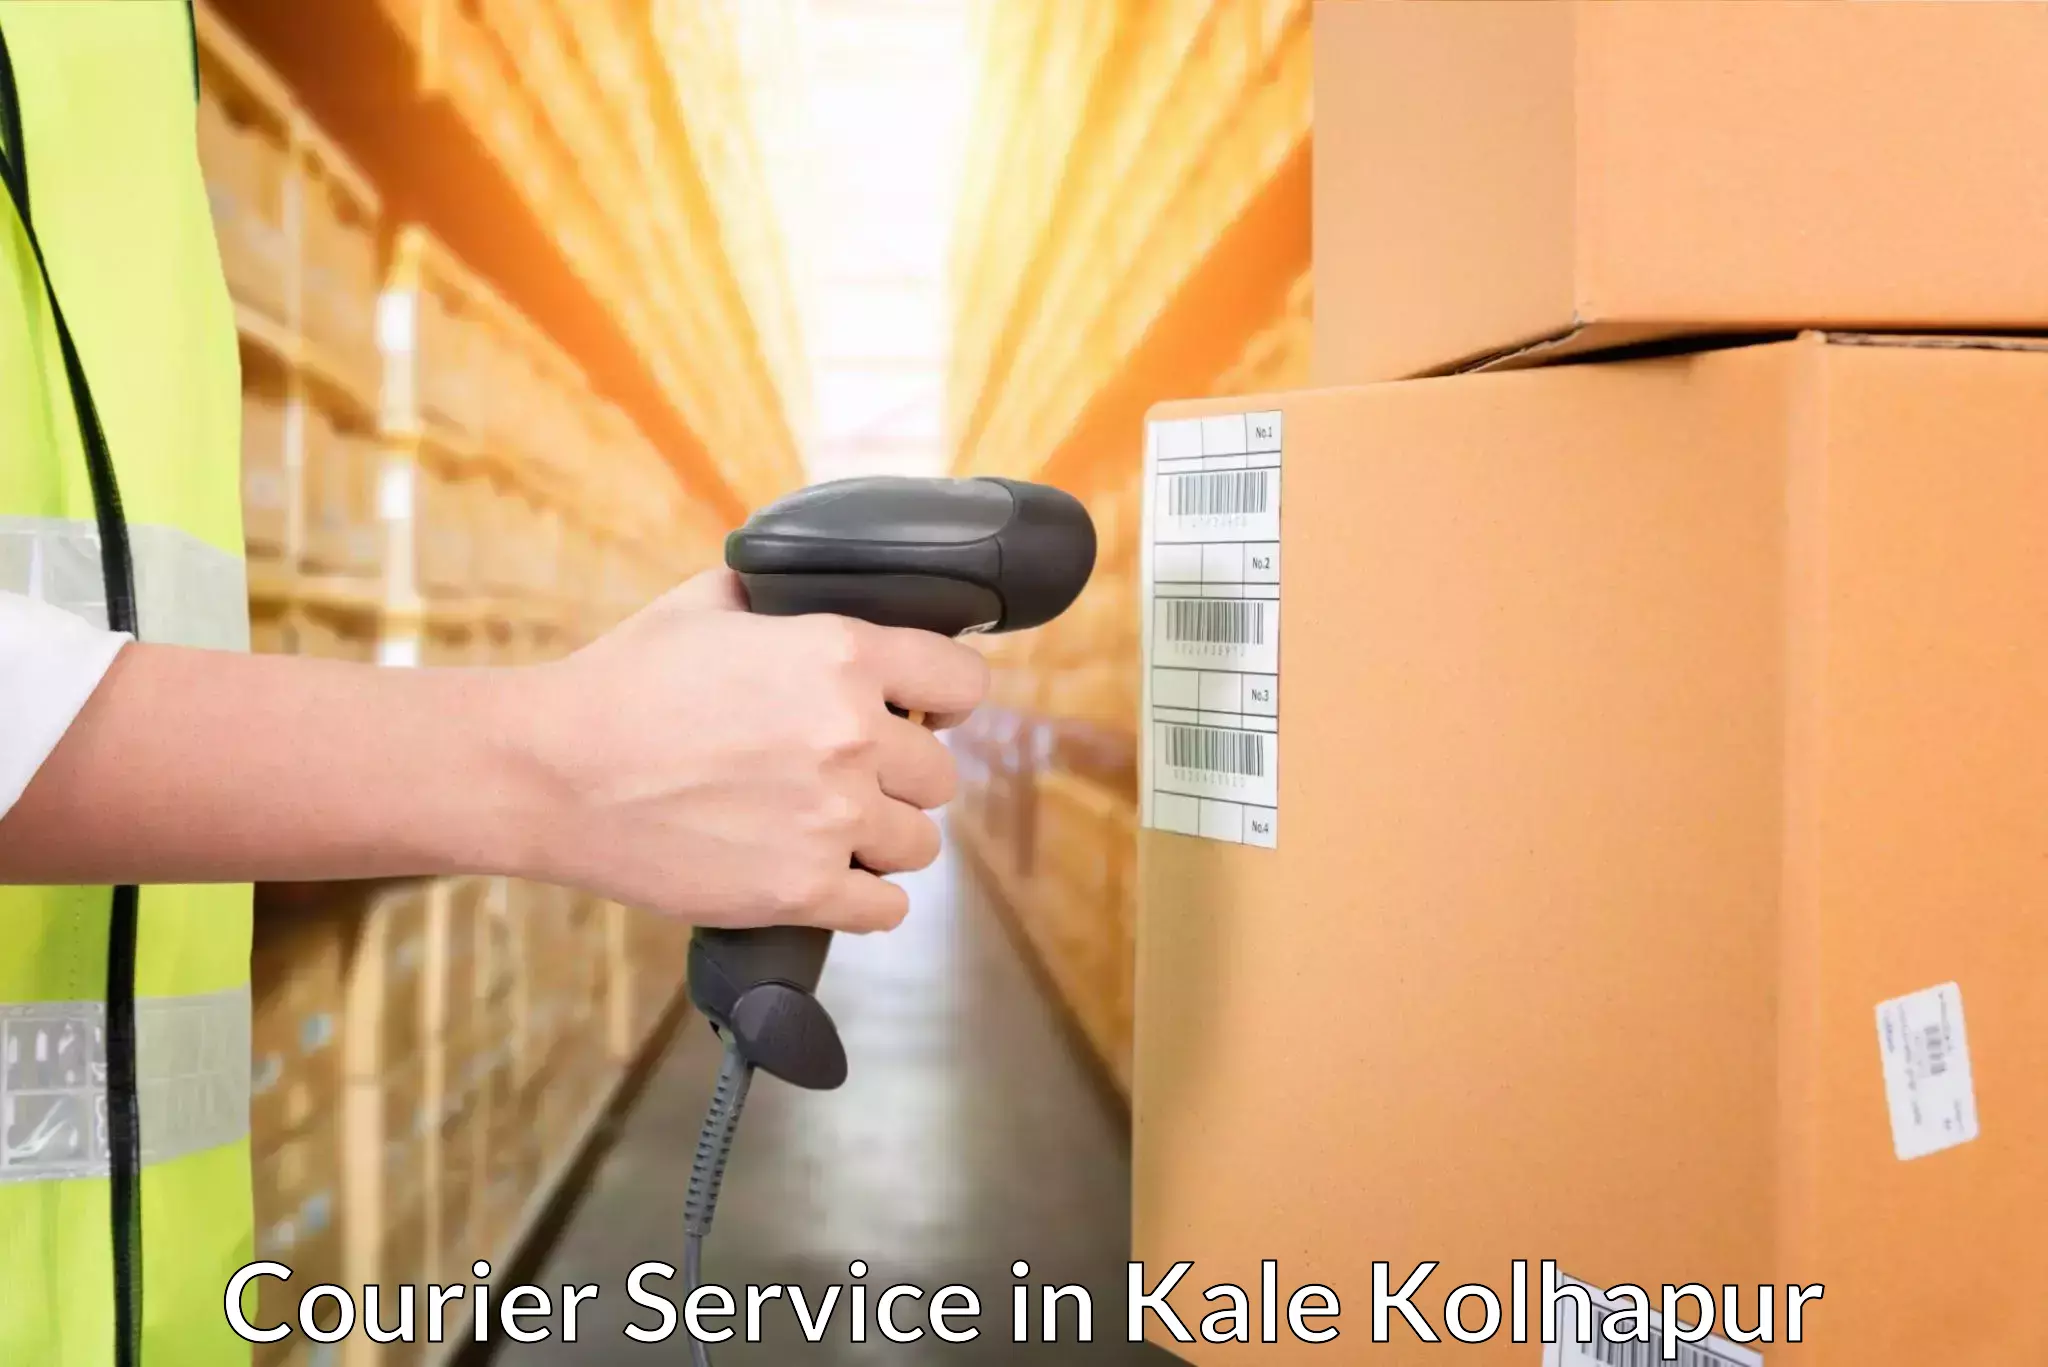 Efficient courier operations in Kale Kolhapur